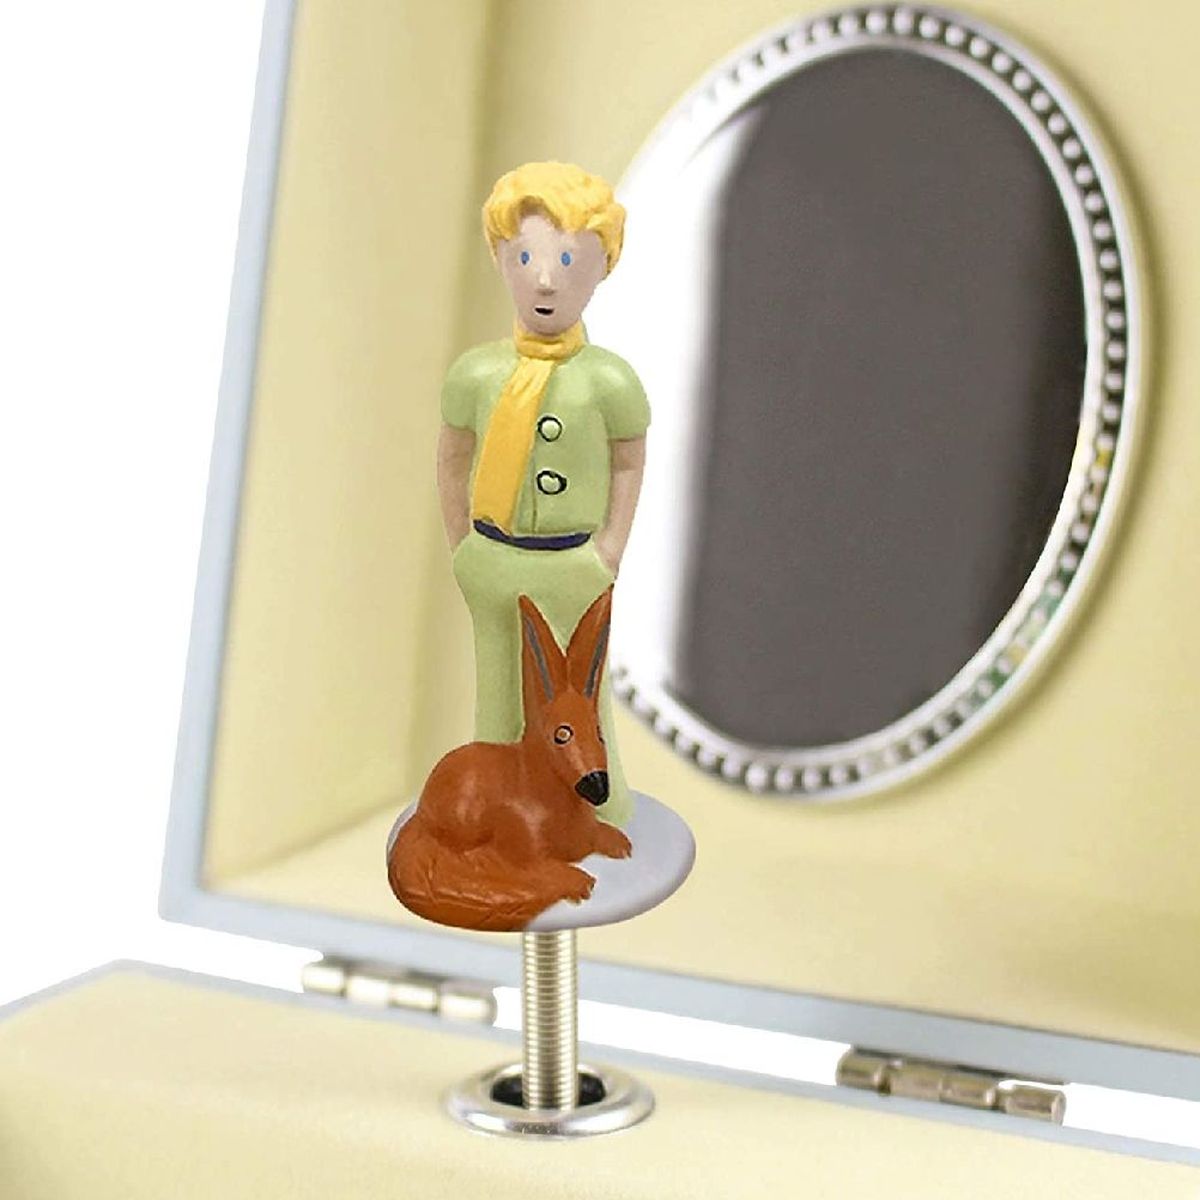 The little Prince jewelry box